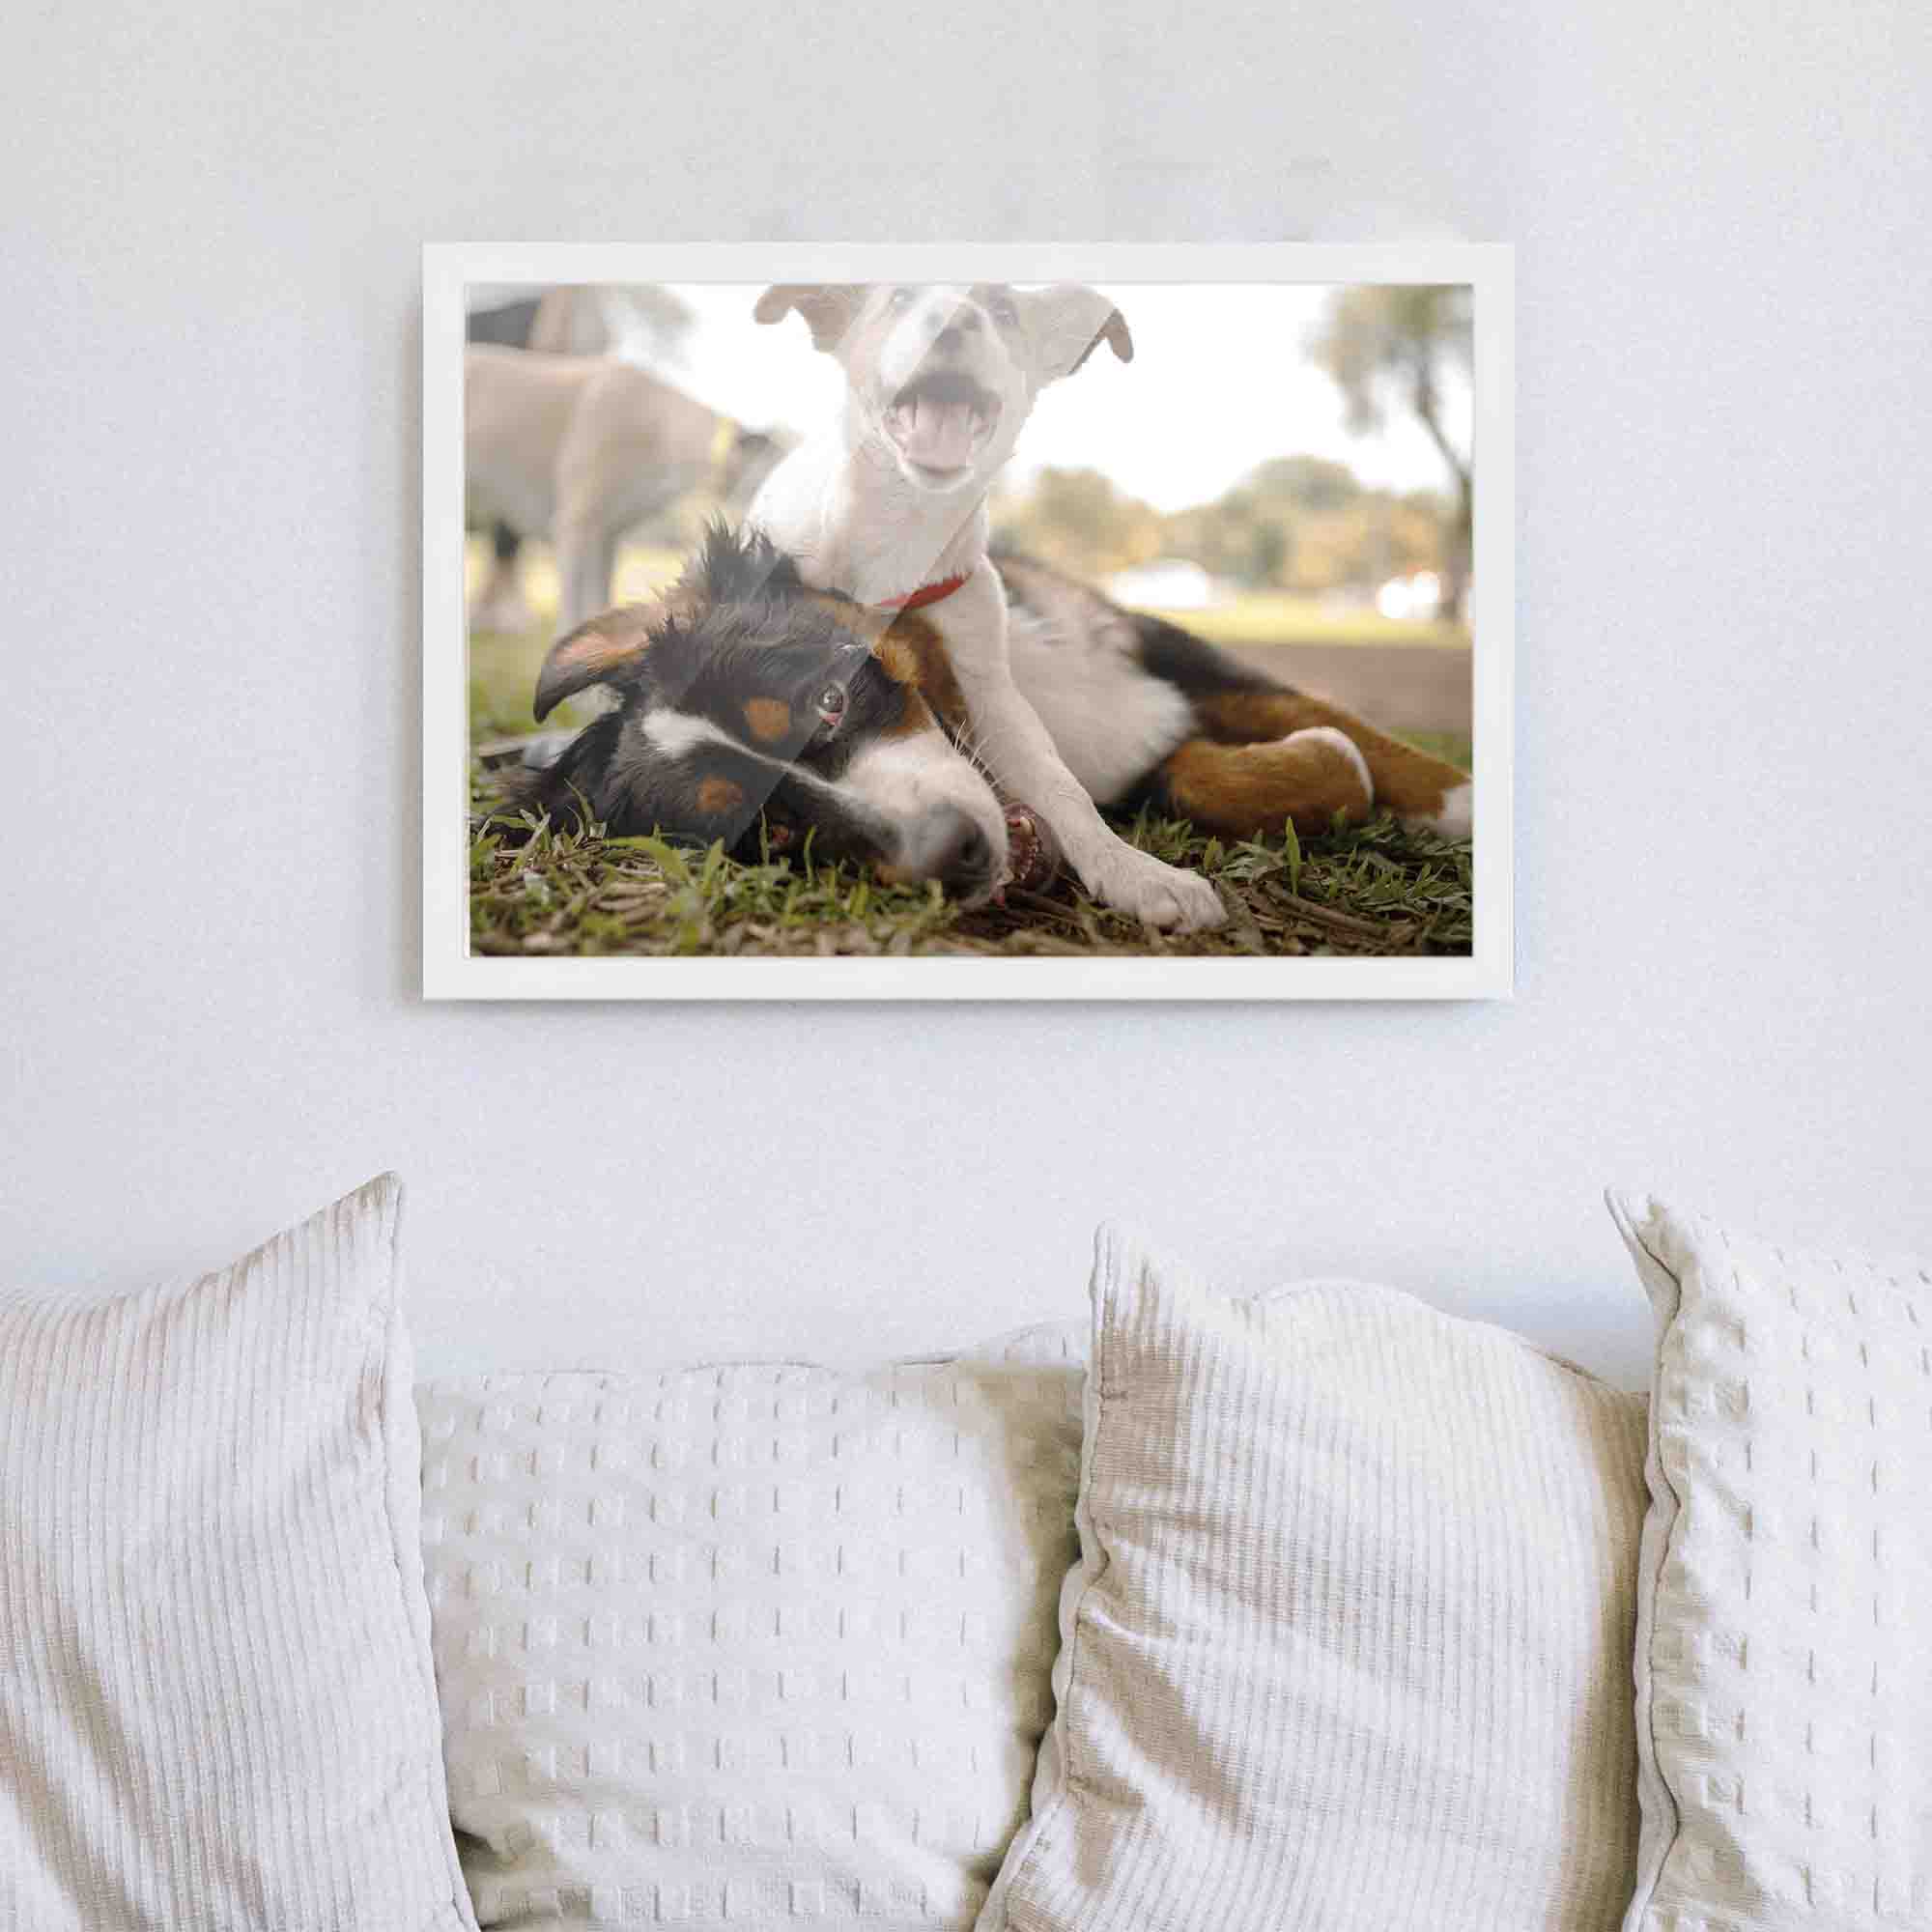 CustomPictureFrames.com 4x7 Frame White Real Wood Picture Frame Width 0.75  inches, Interior Frame Depth 0.5 inches